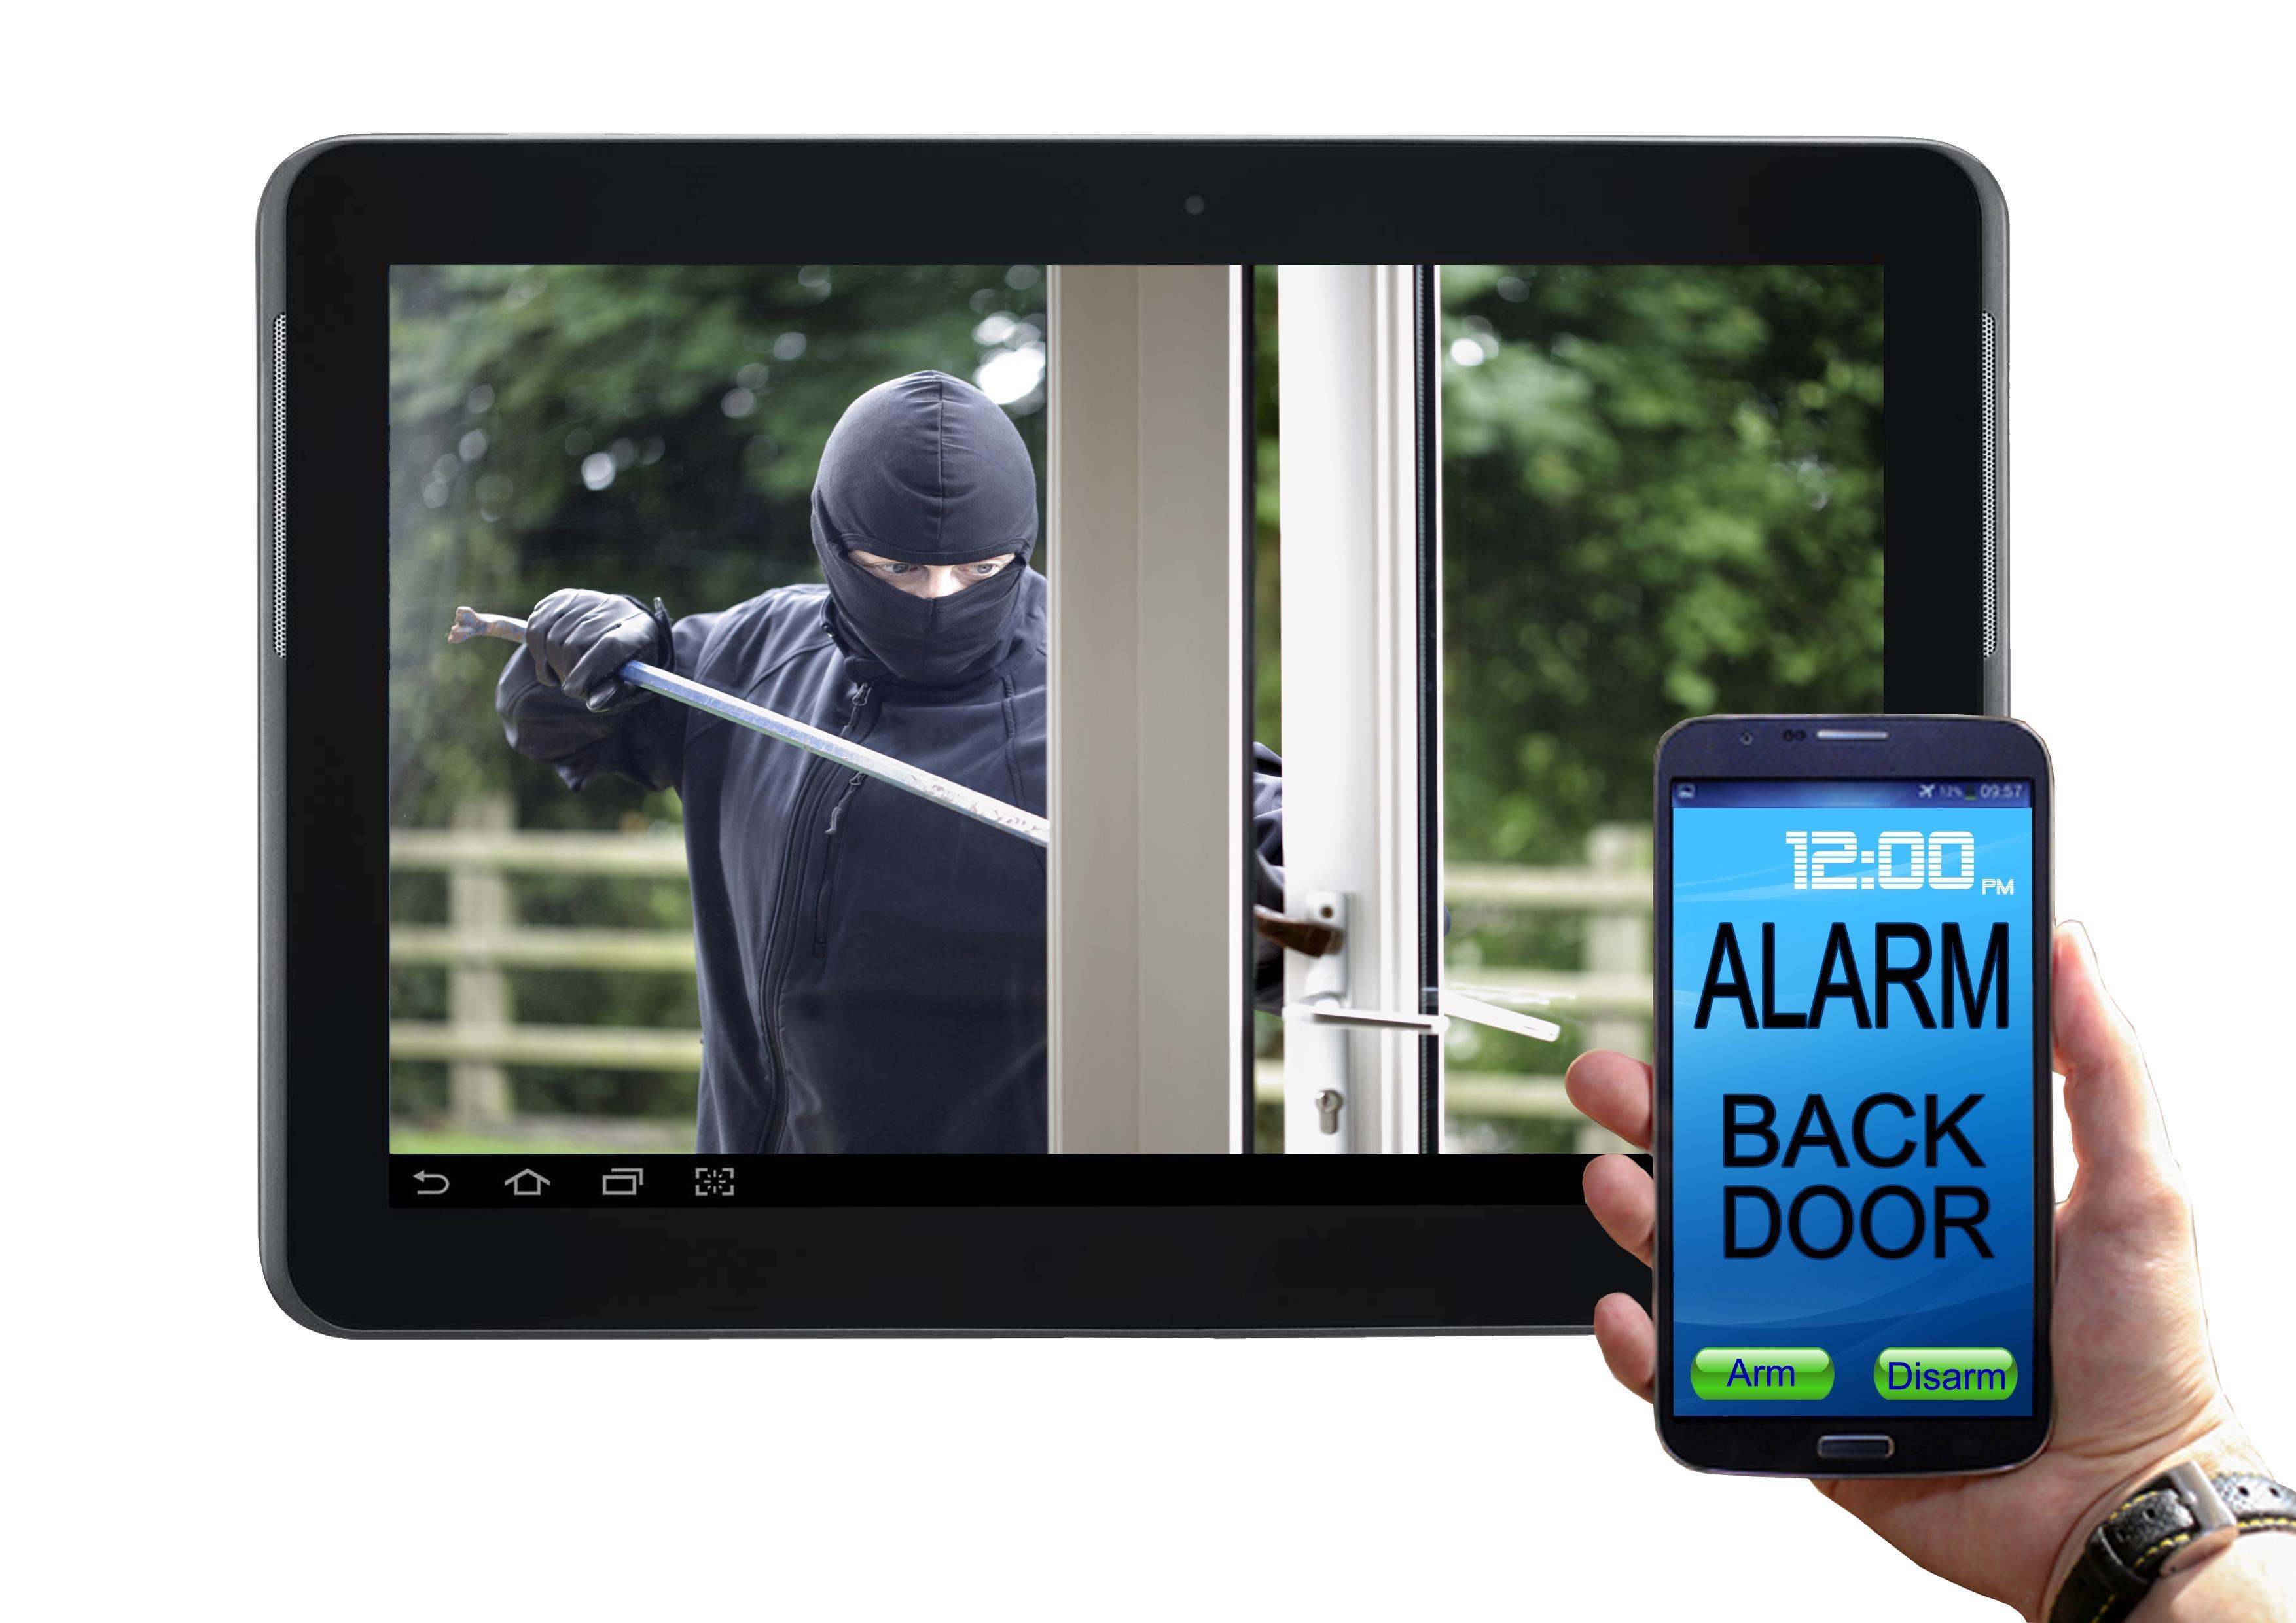 Be notified when someone breaks into your home.